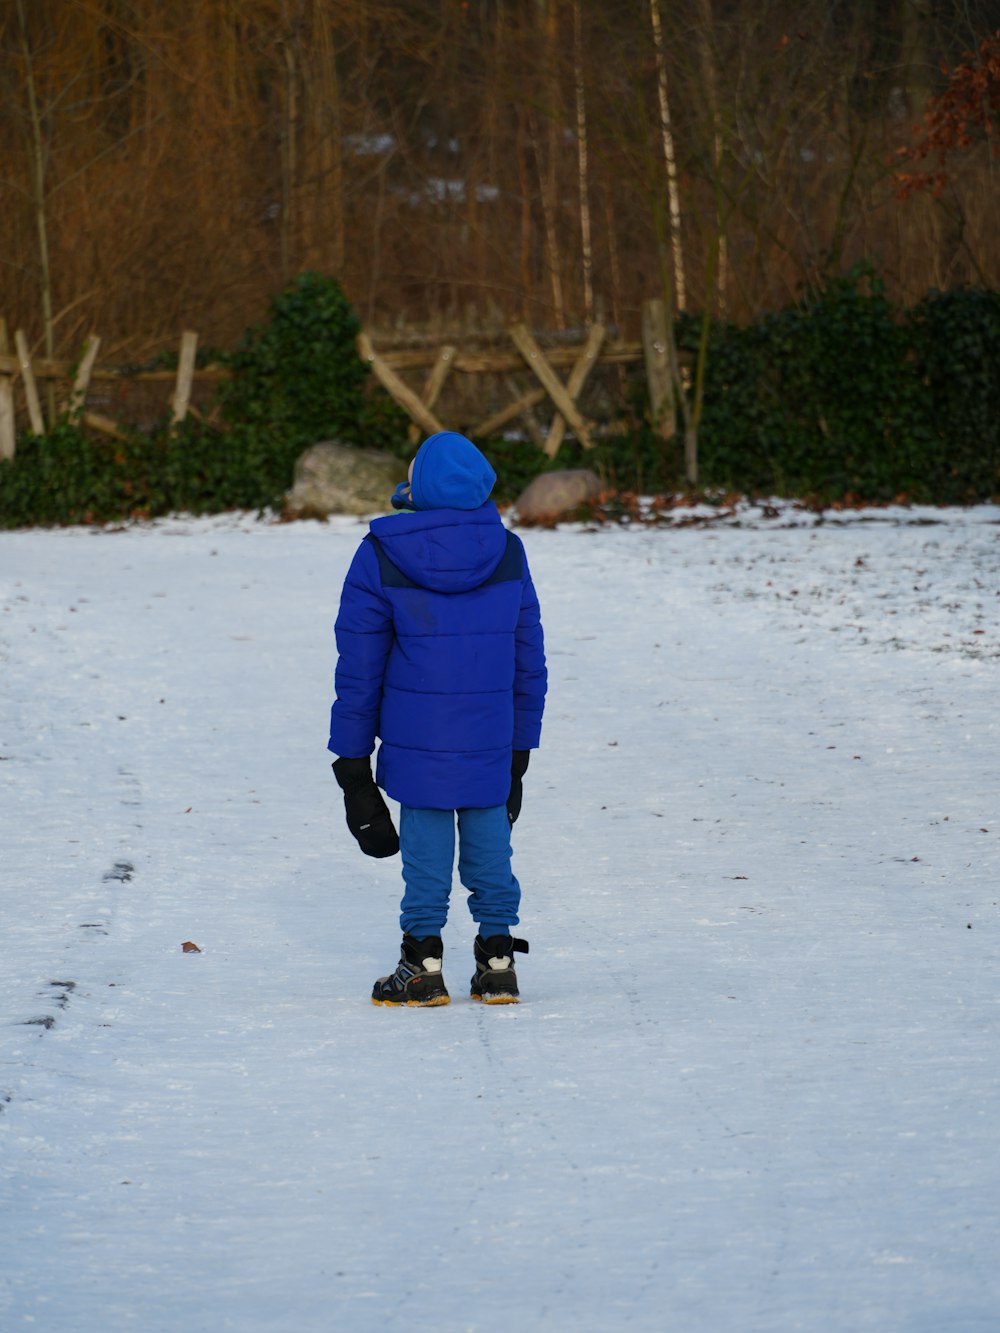 a person in a blue jacket walking in the snow